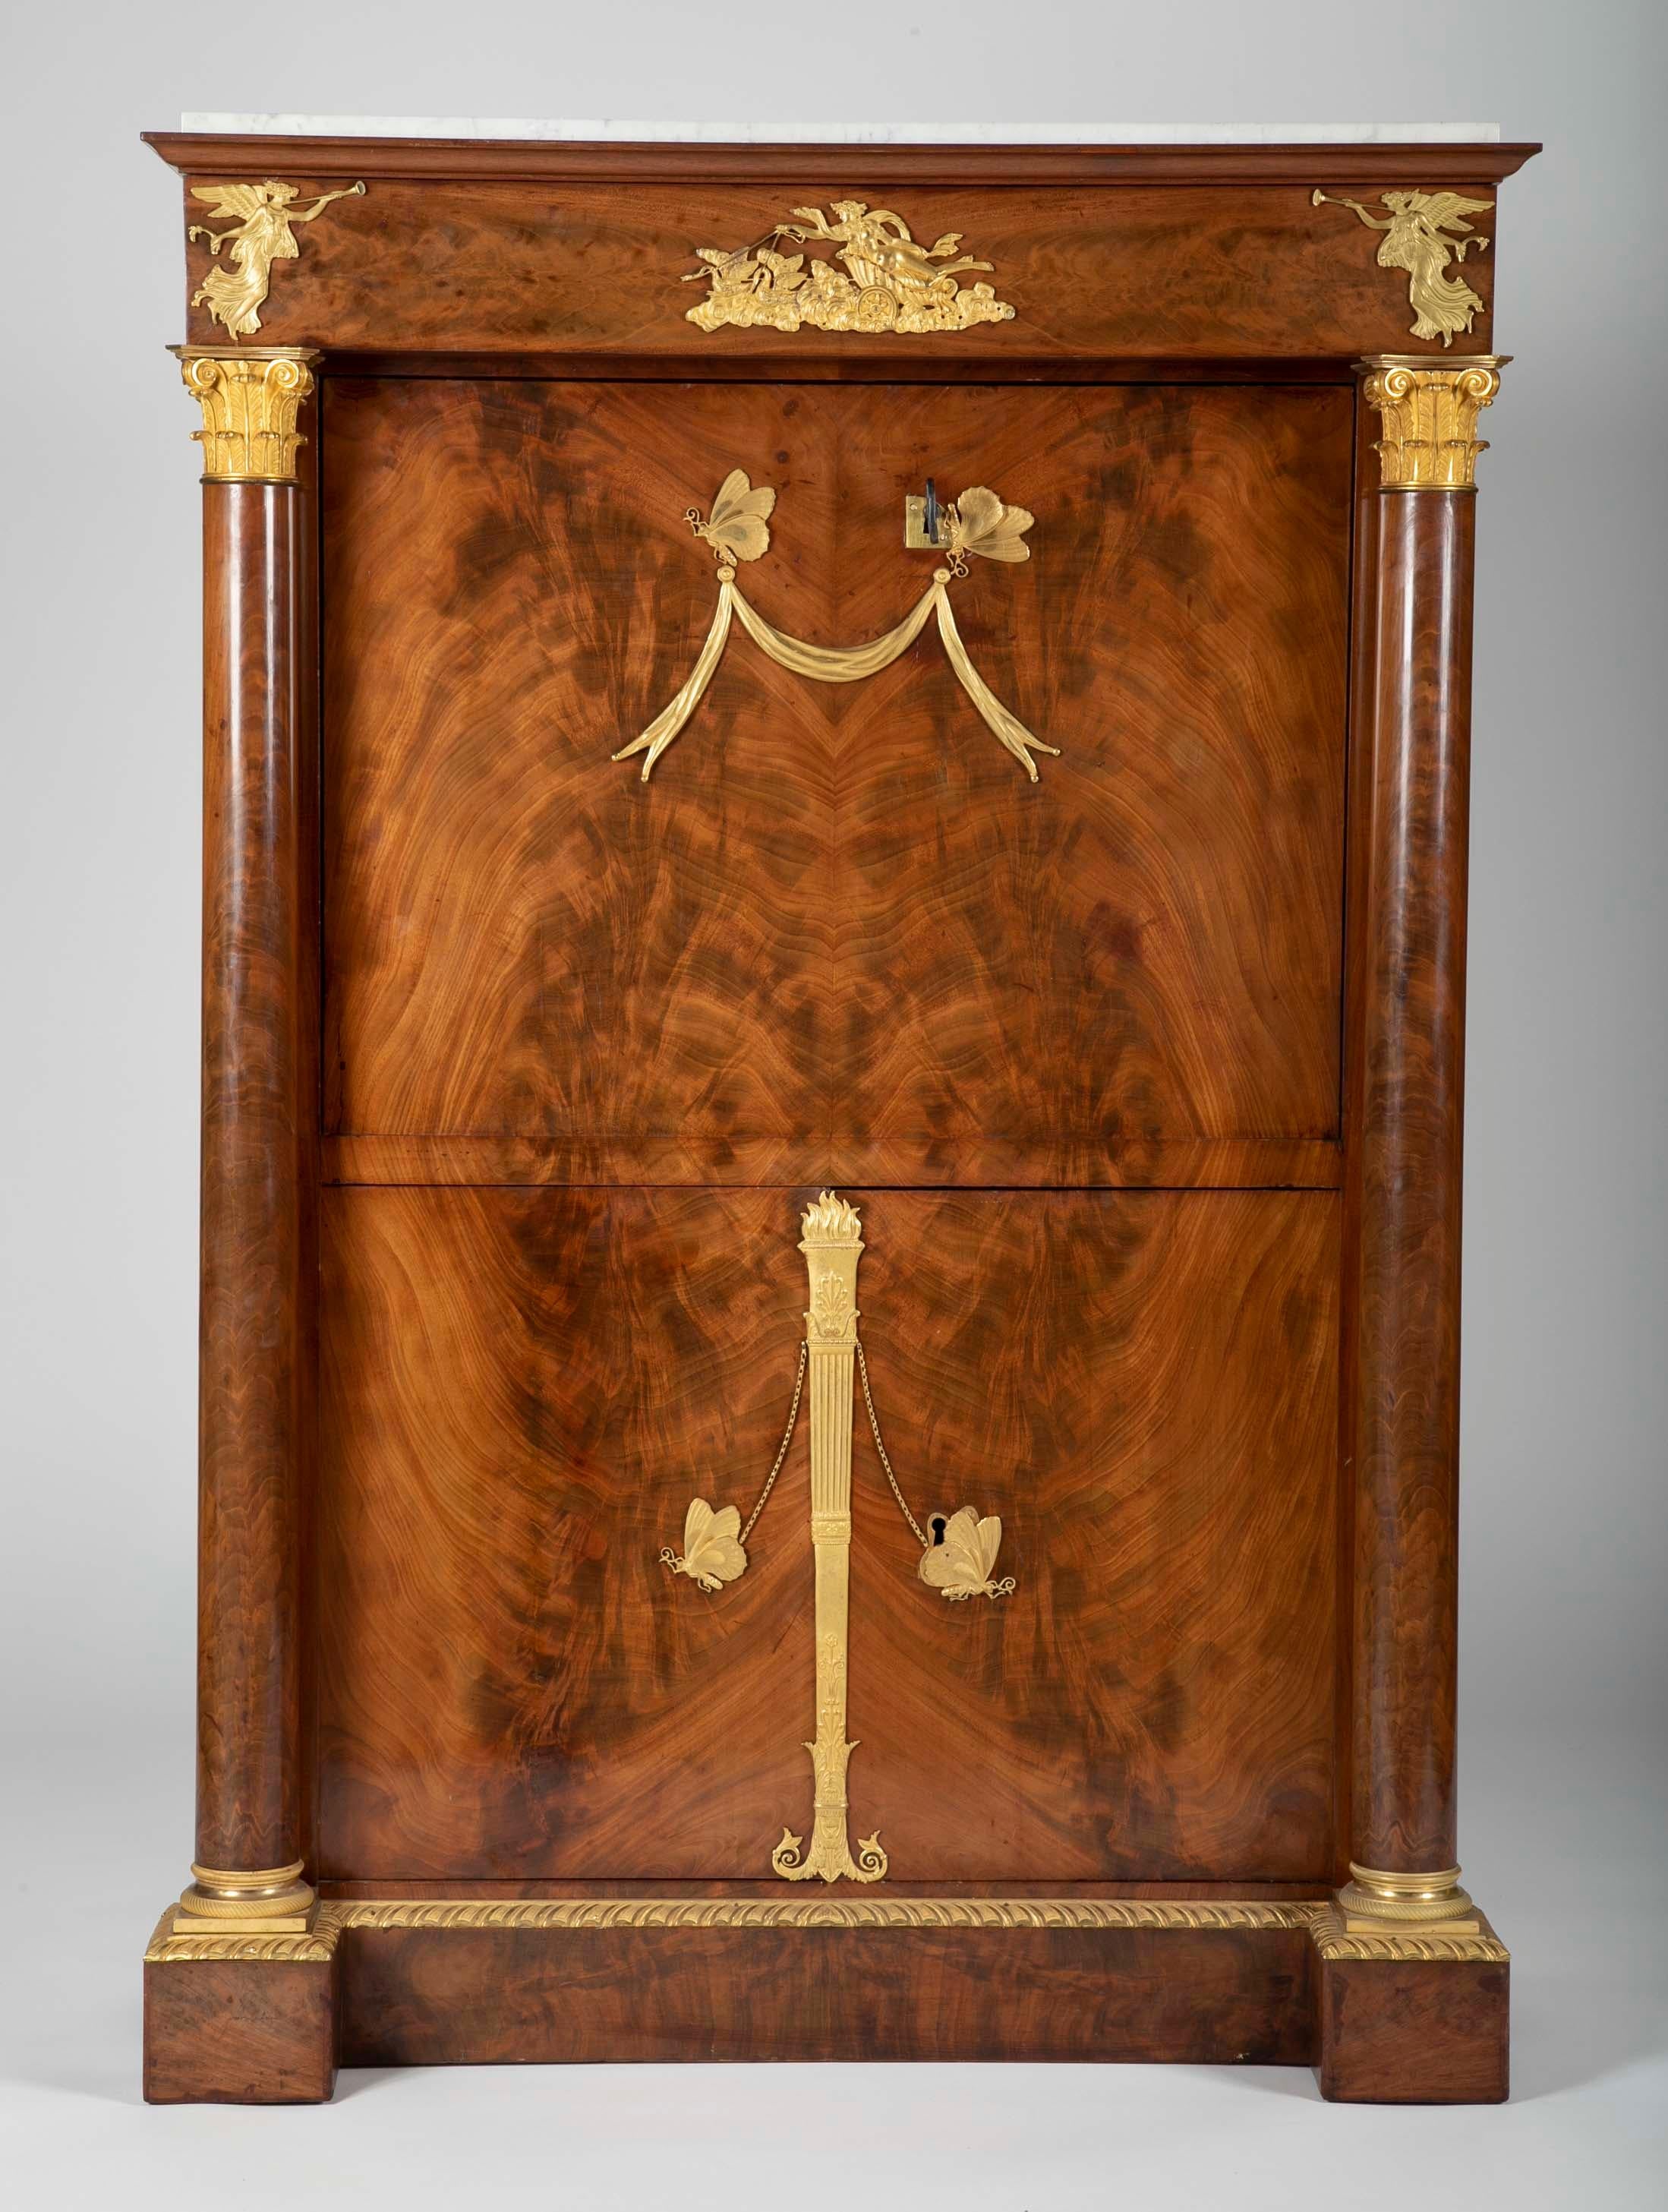 A very impressive Secretaire Abattant with exceptional ormalou mounts including a rare buttlerfly form. The same mounts can be seen on pieces of S. Jamar furniture in 